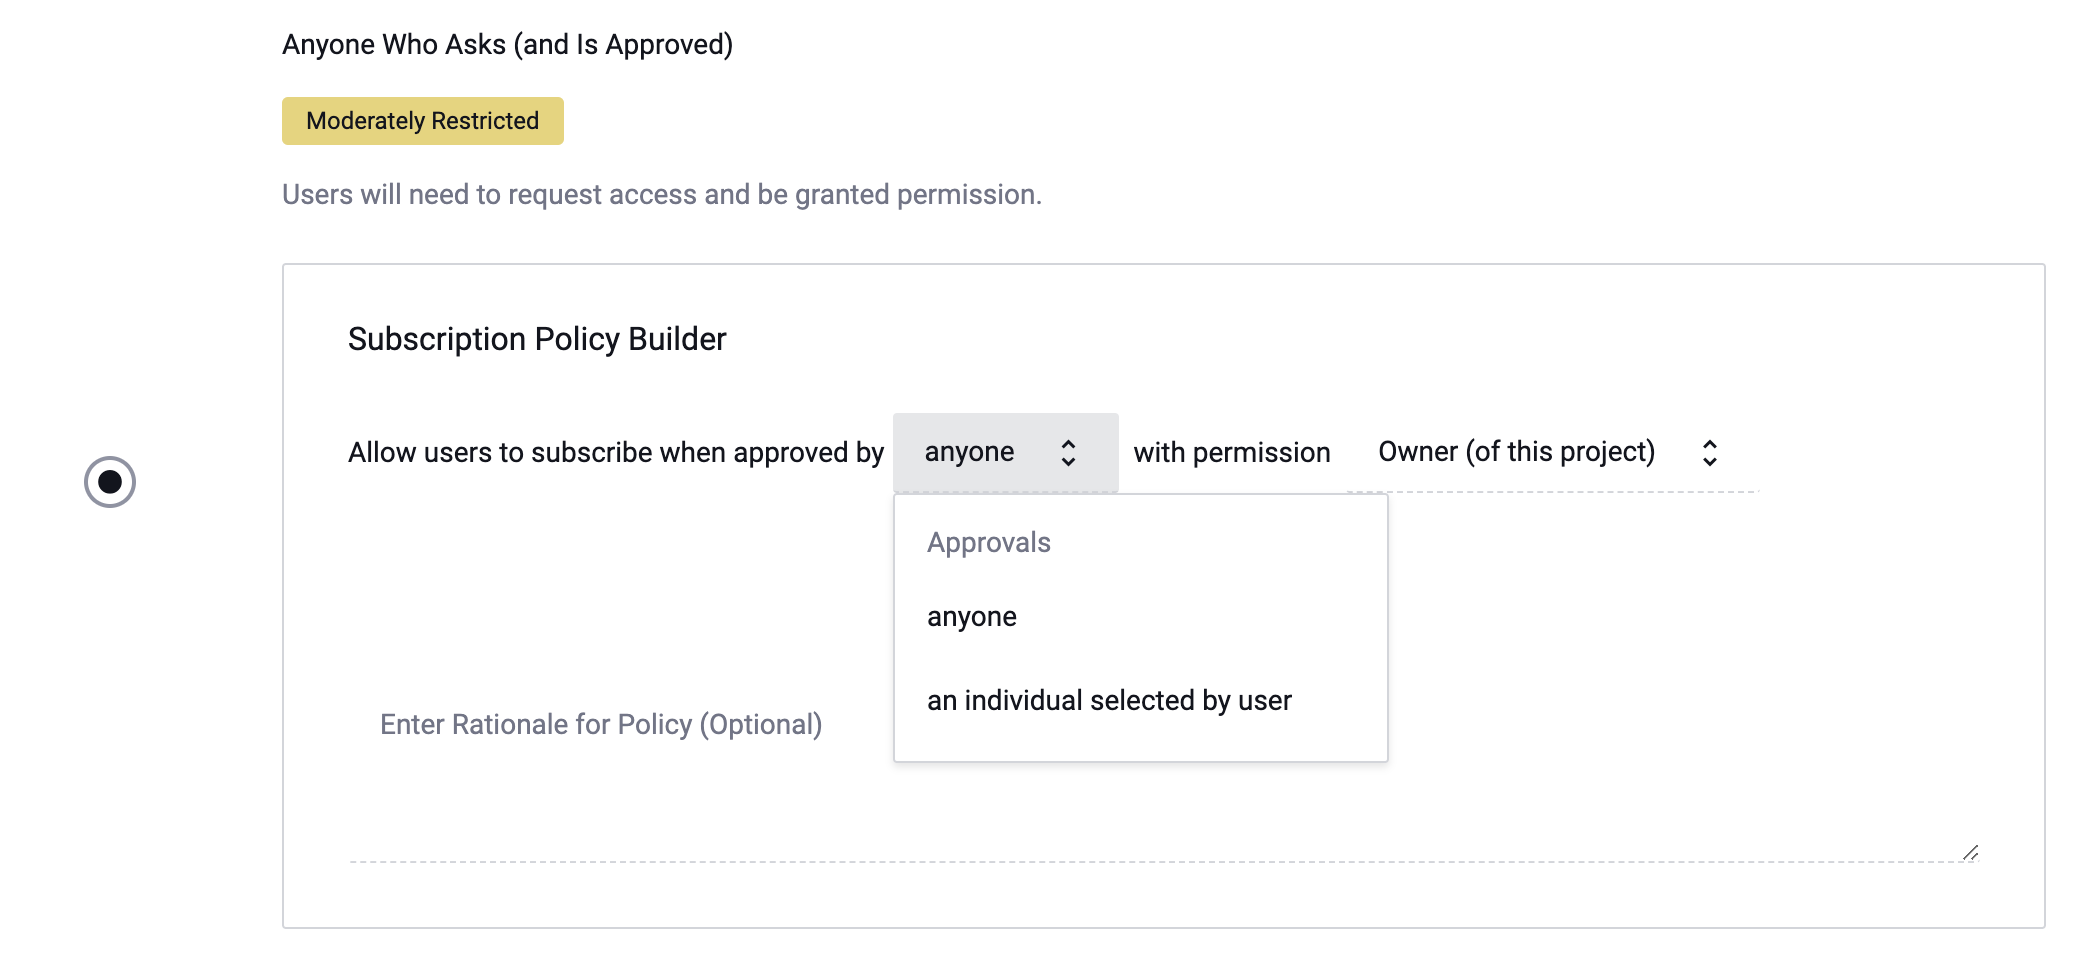 Subscription Policy Builder